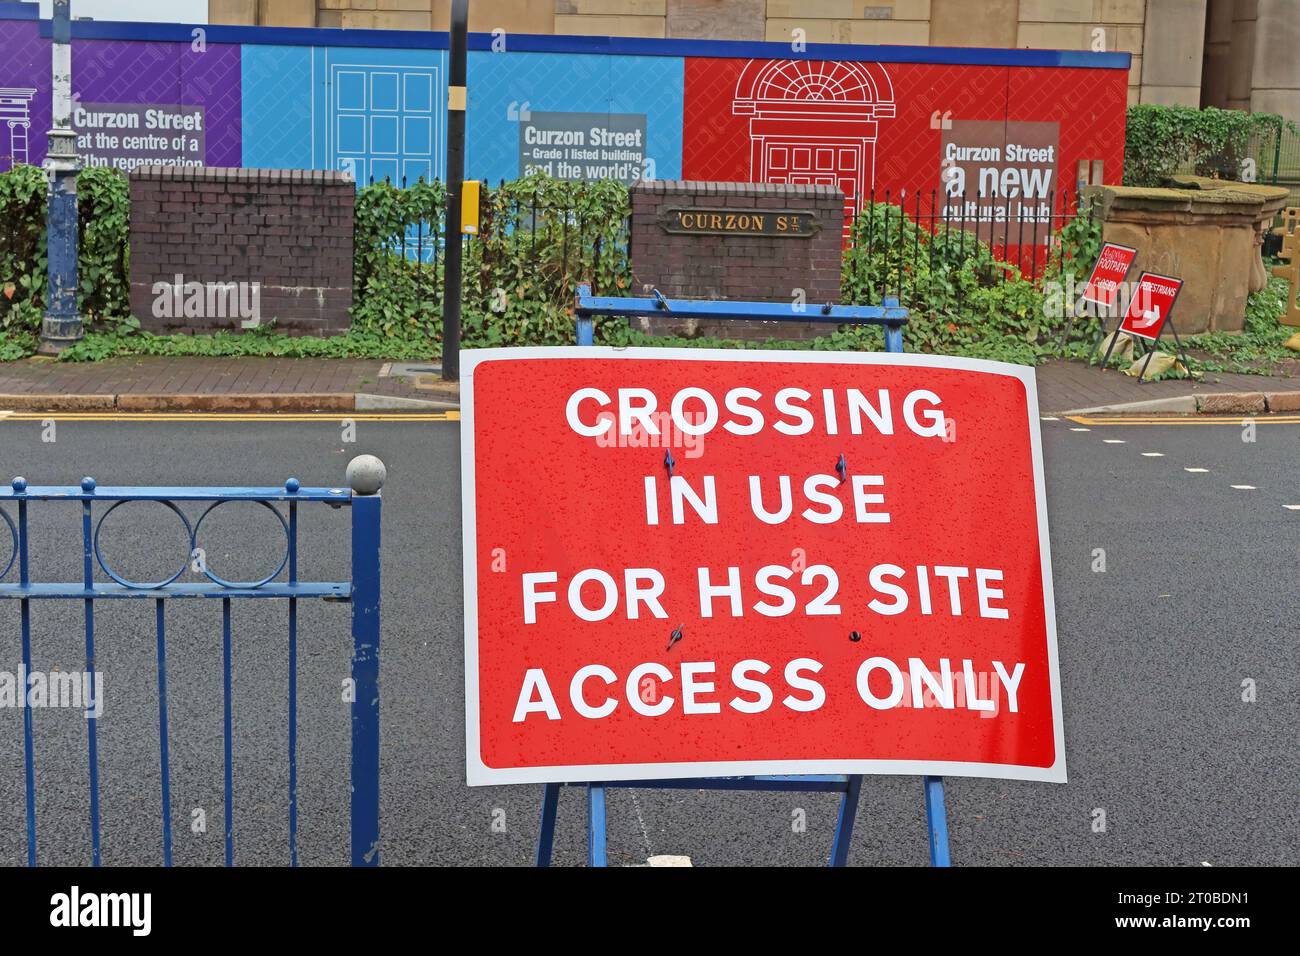 Red sign, Crossing In use, for HS2 Site, Access Only - Science Garden, 1 Curzon St, Birmingham, West Midlands, UK,  B4 7XG Stock Photo